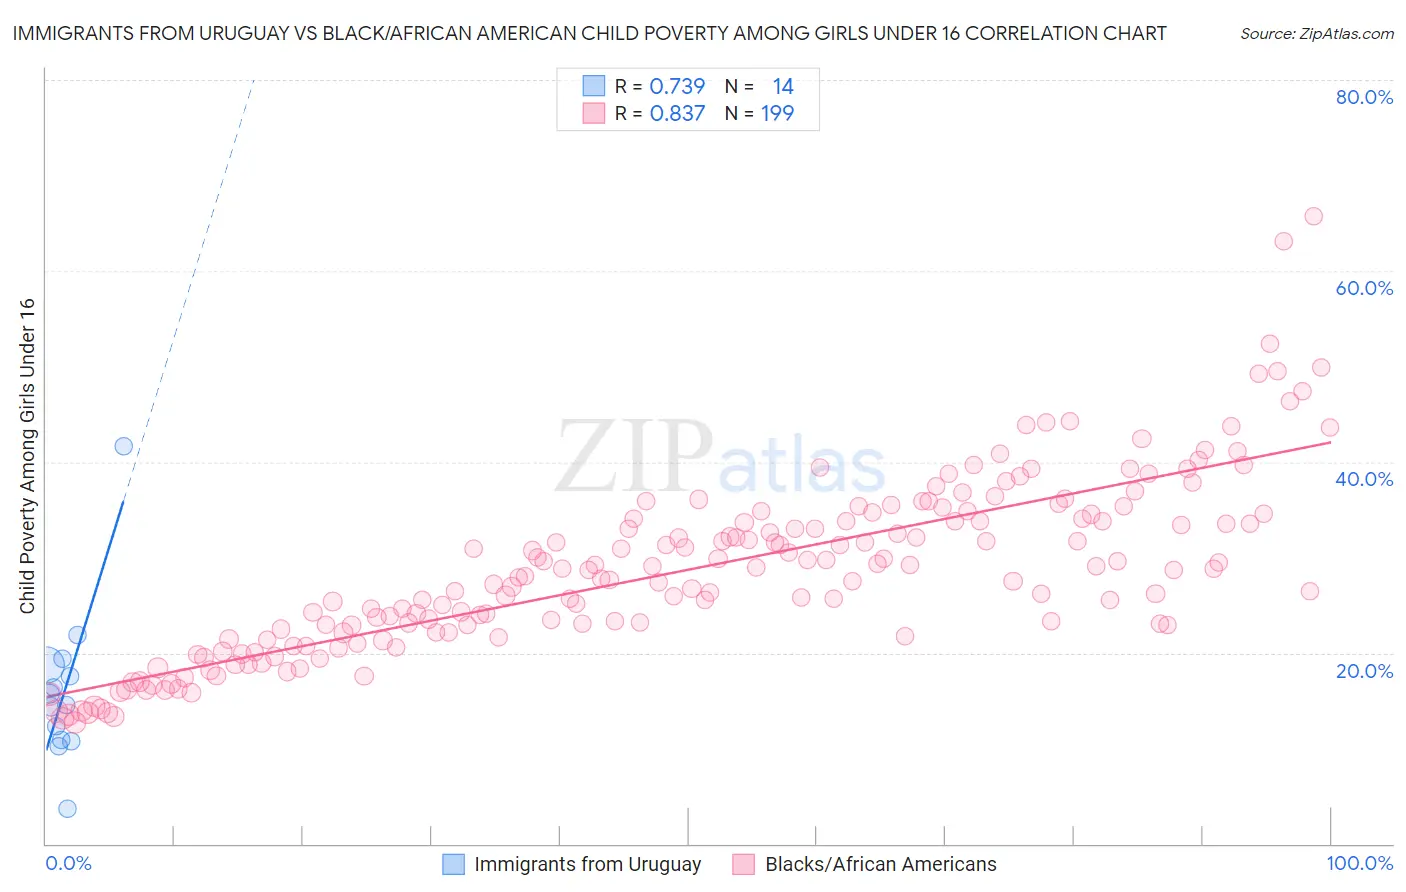 Immigrants from Uruguay vs Black/African American Child Poverty Among Girls Under 16